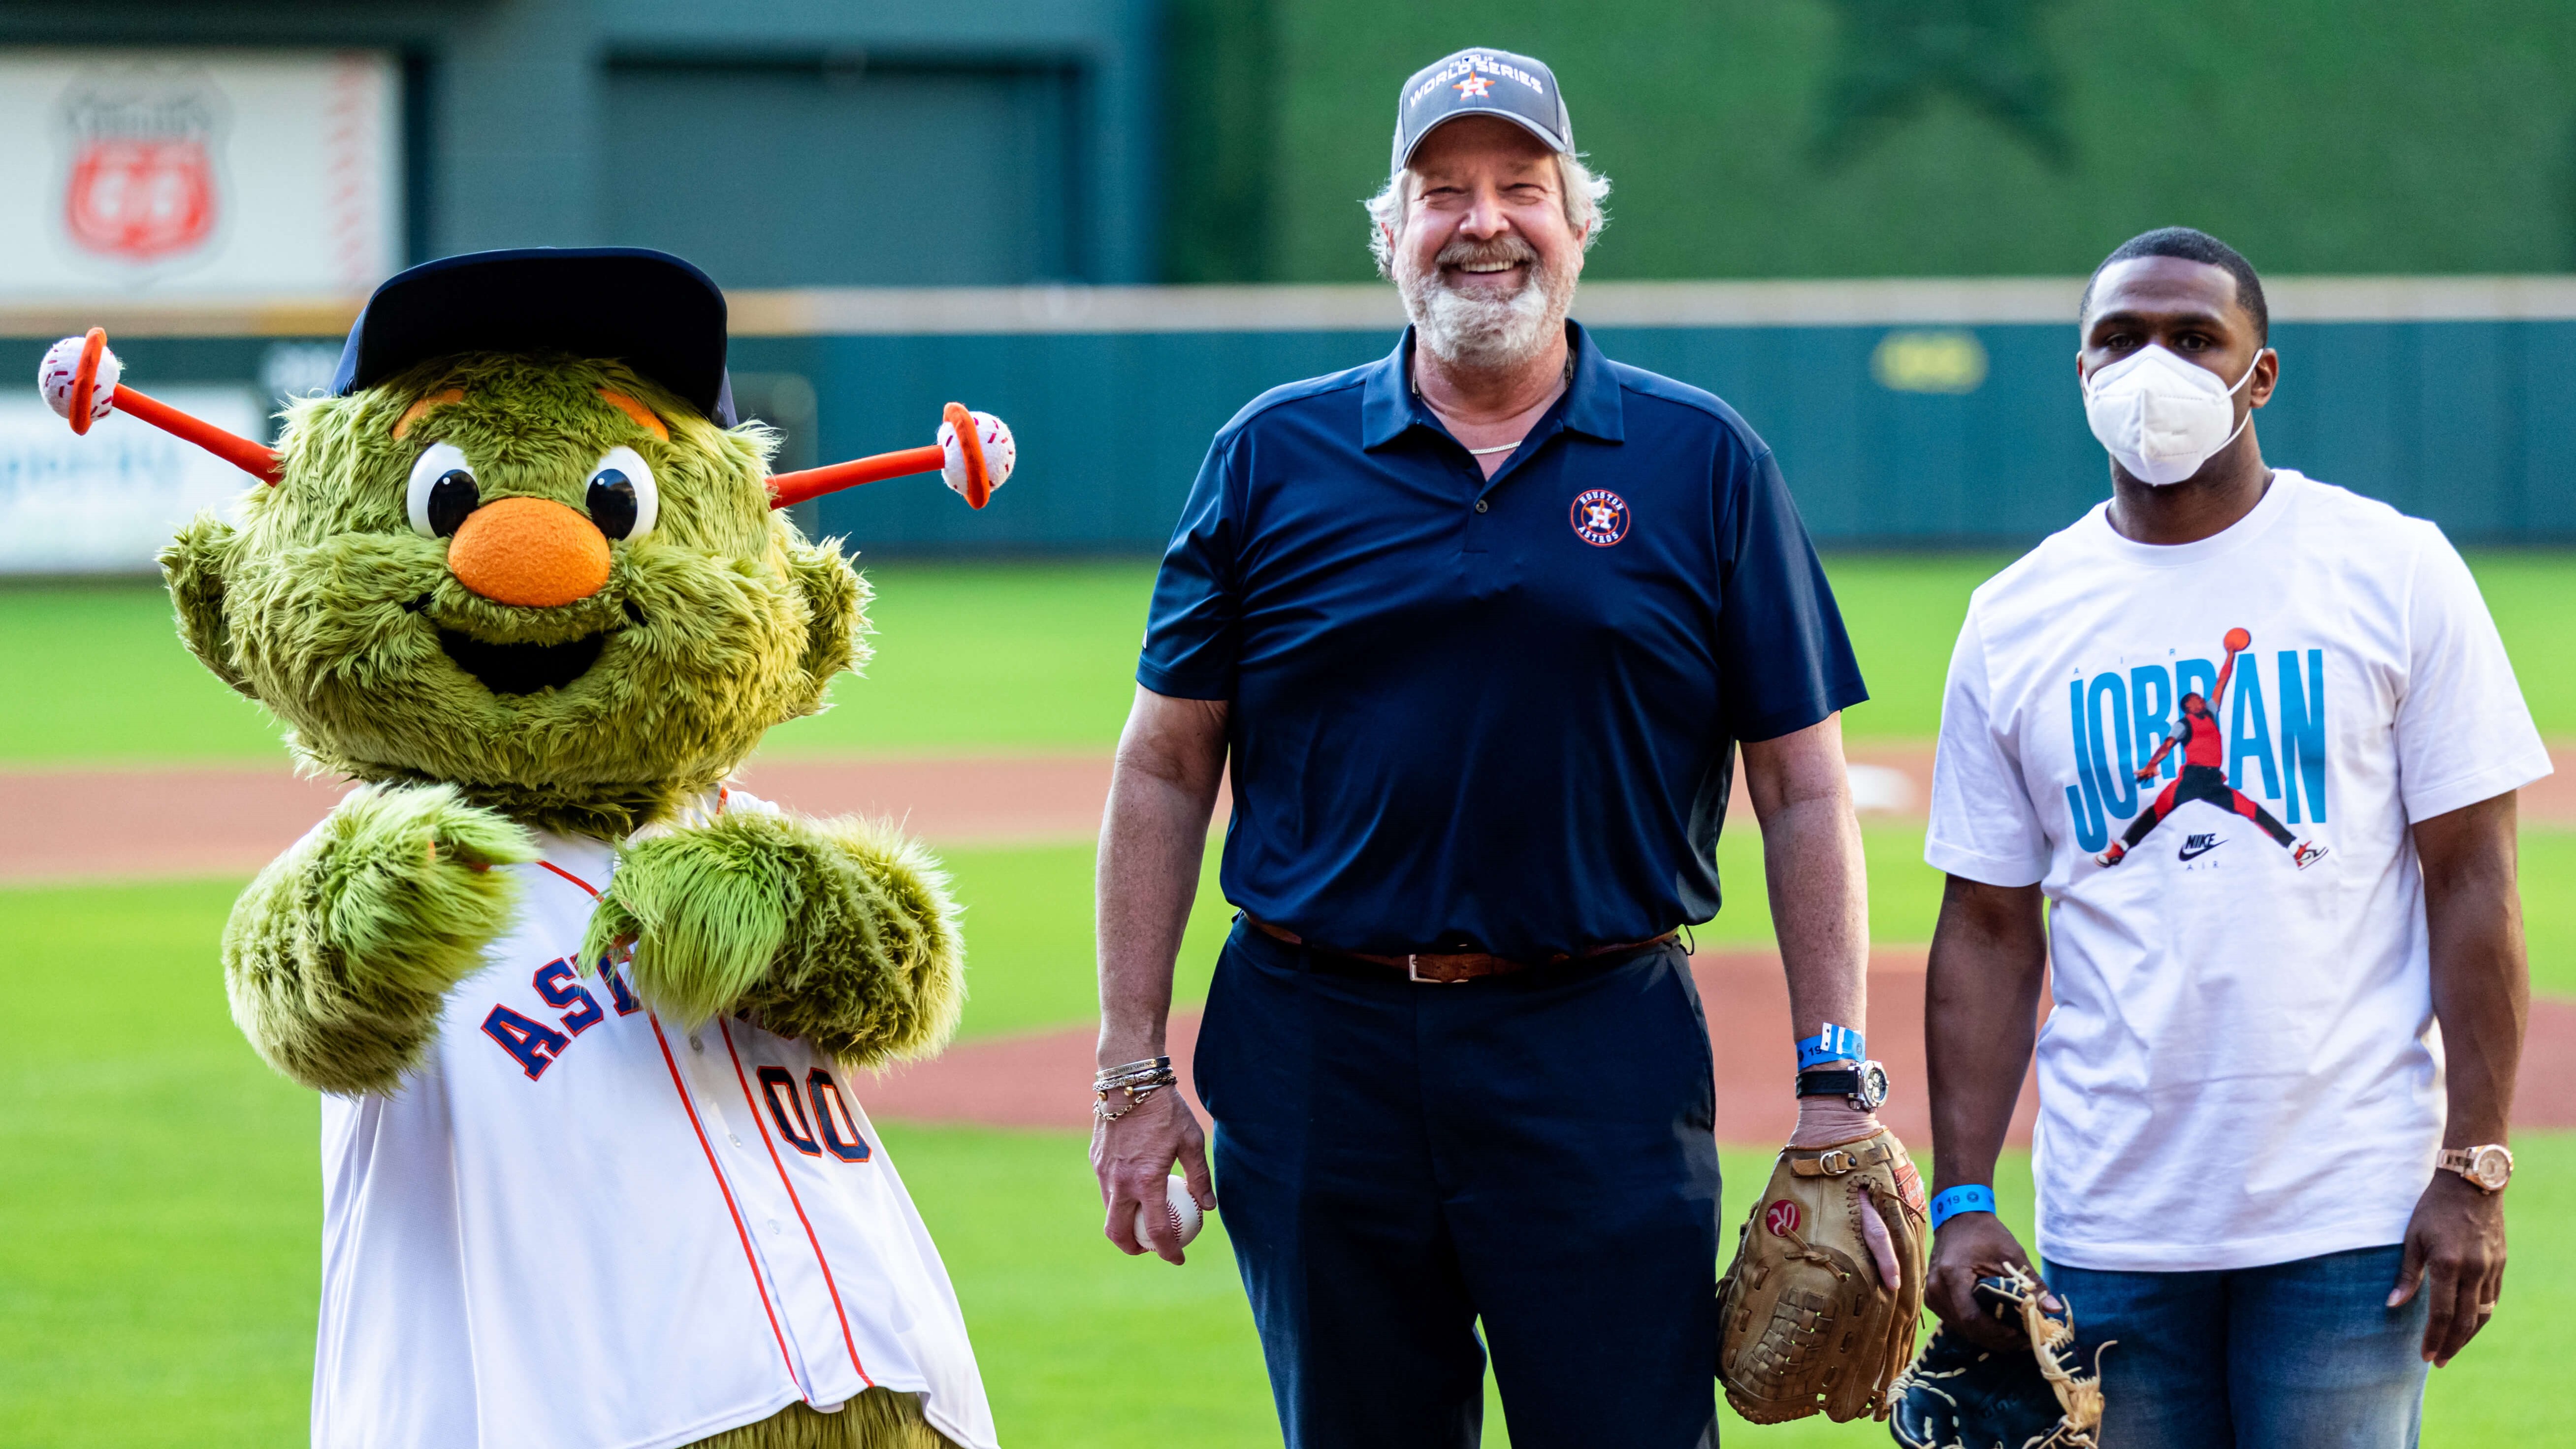 DR. GUY LEWIS THROWS OUT FIRST PITCH AT HOUSTON ASTROS GAME!